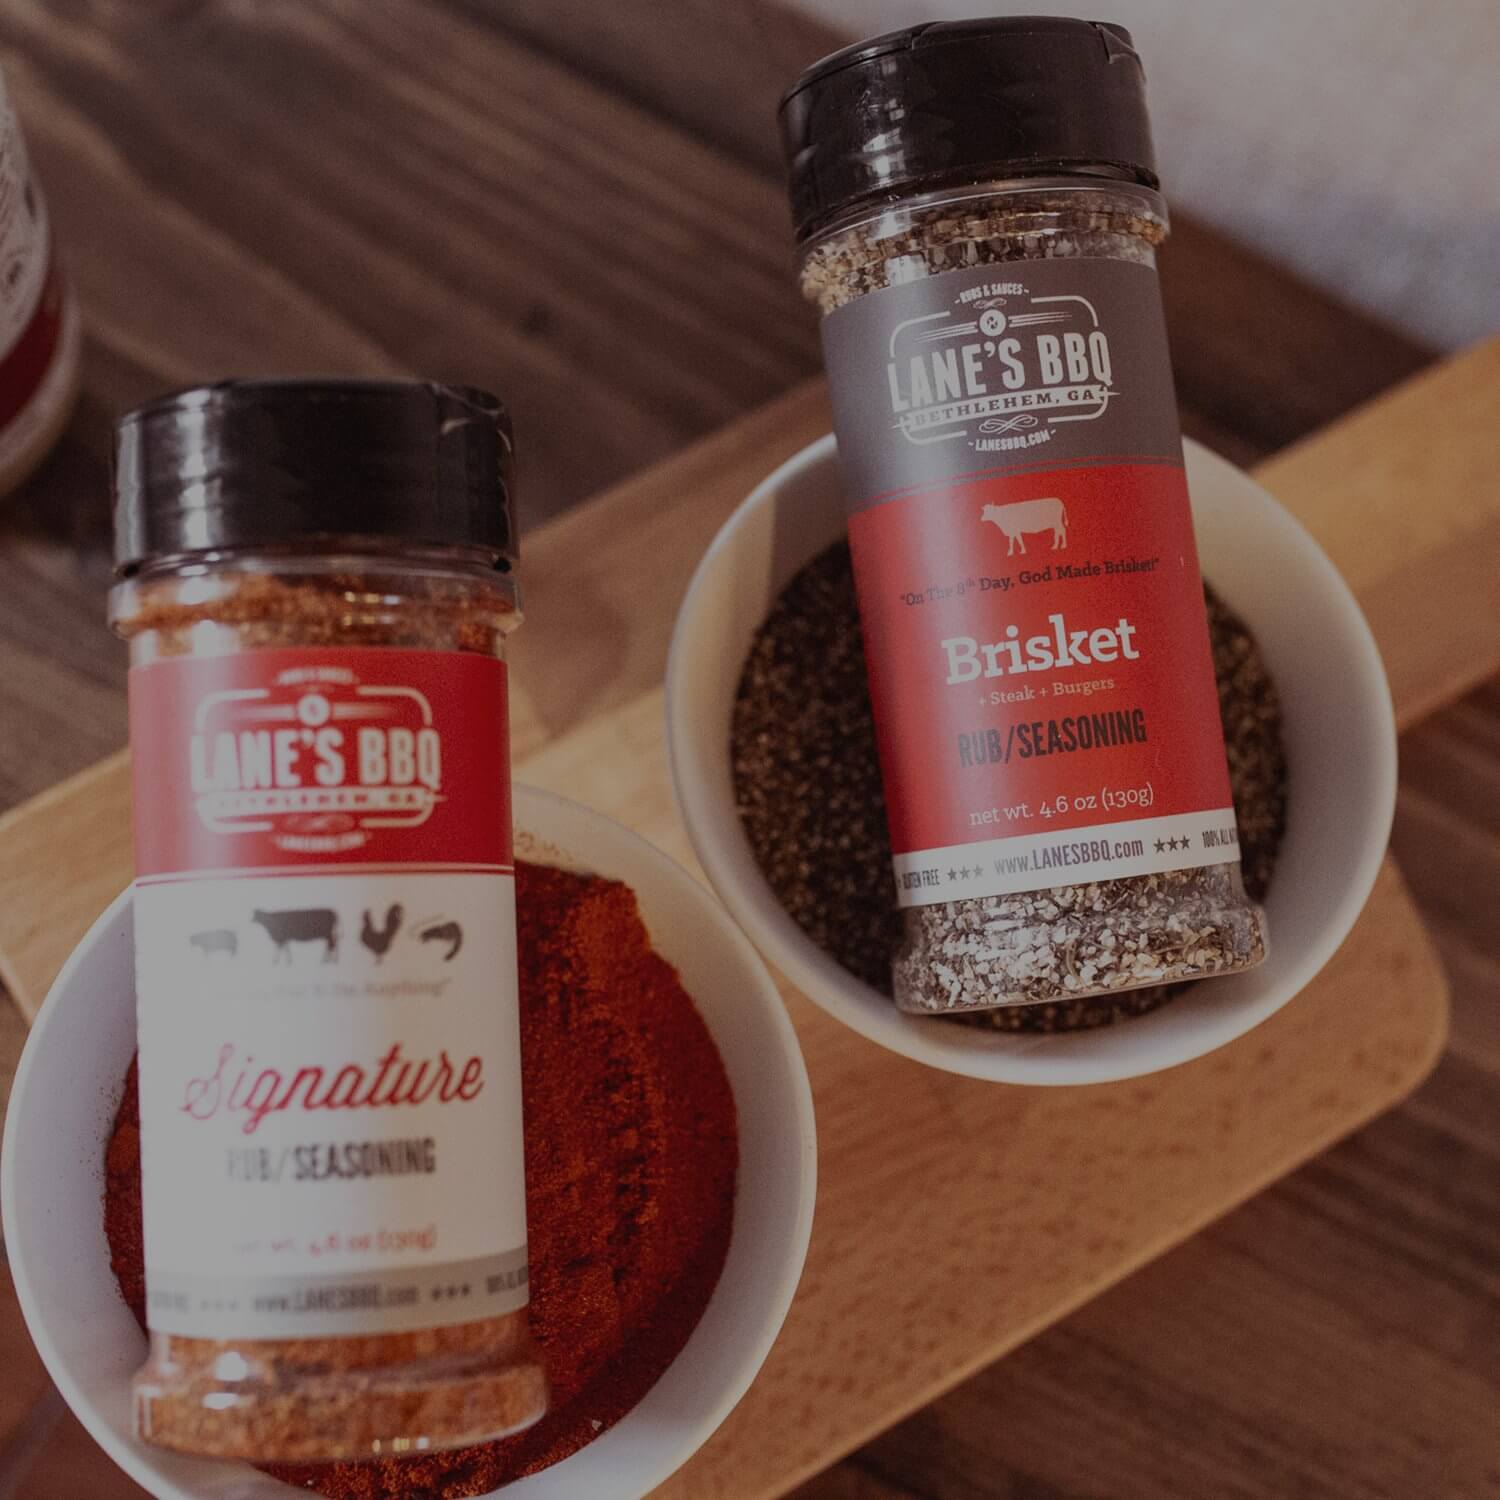 Handcrafted rubs by Lane's BBQ